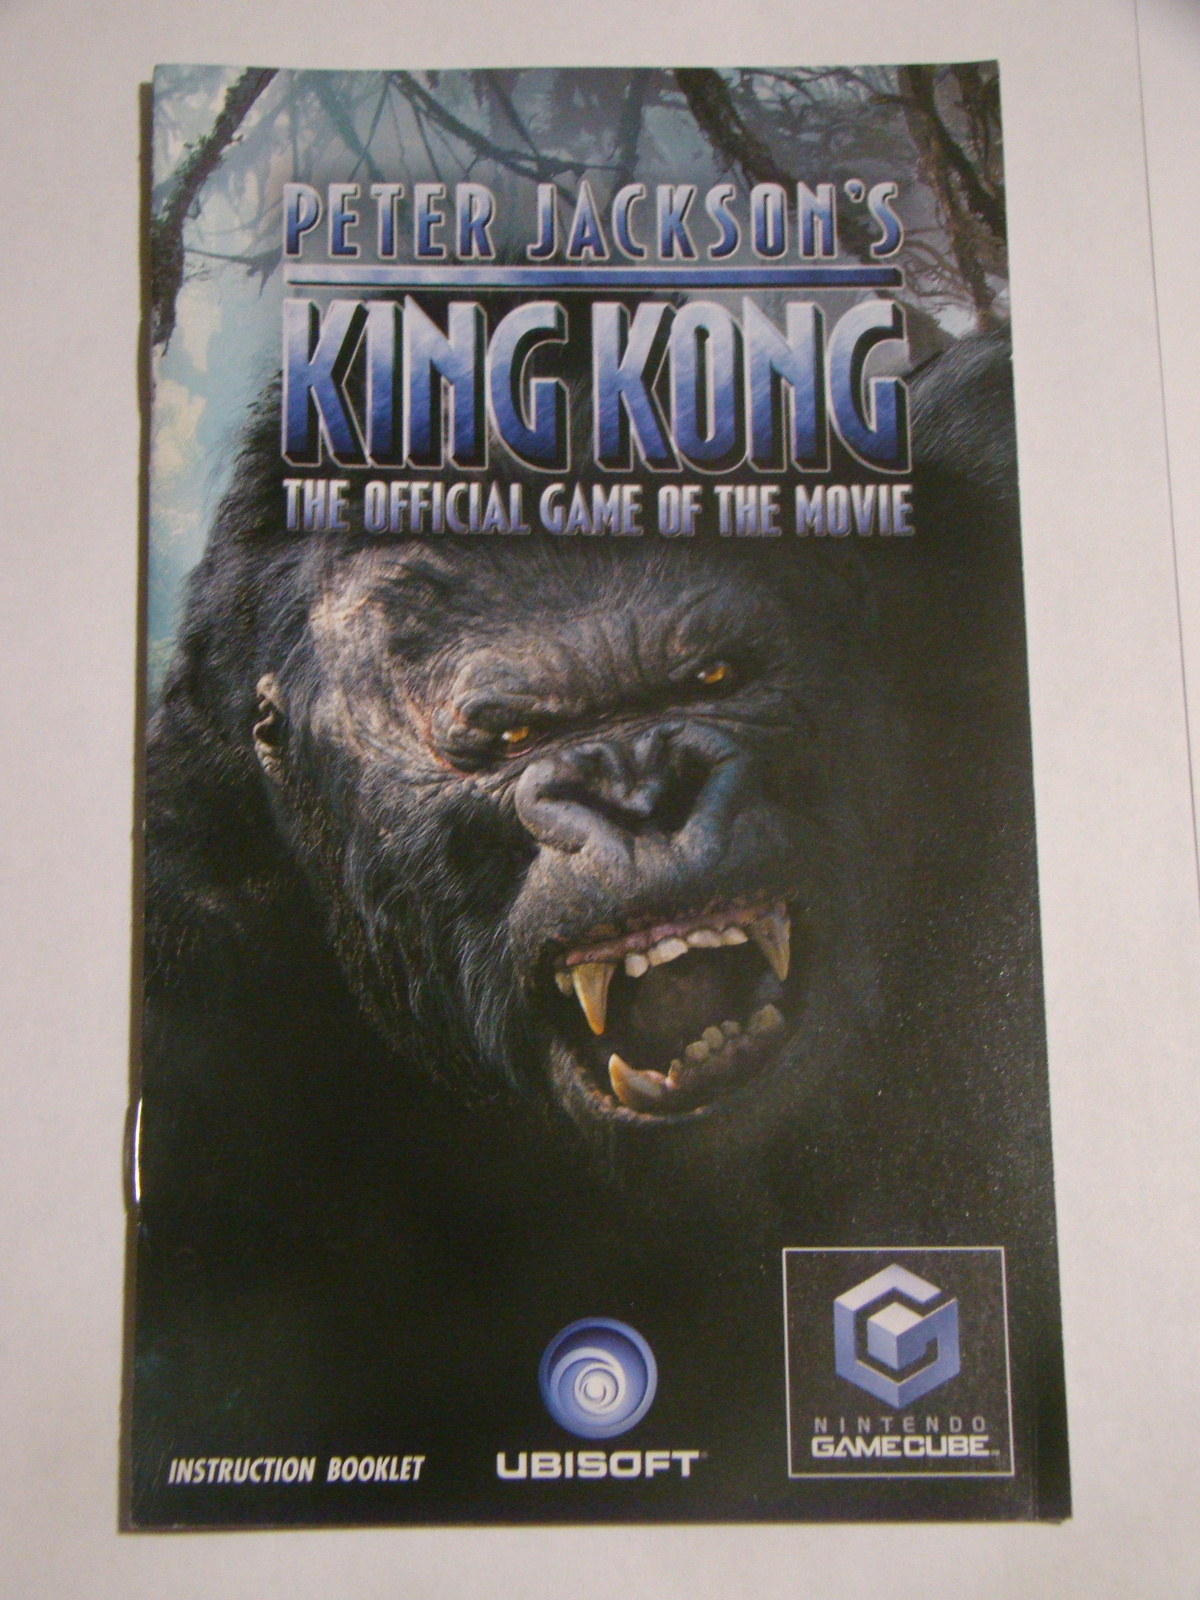 Primary image for Nintendo GameCube - PETER JACKSON'S - KING KONG (Replacement Manual)